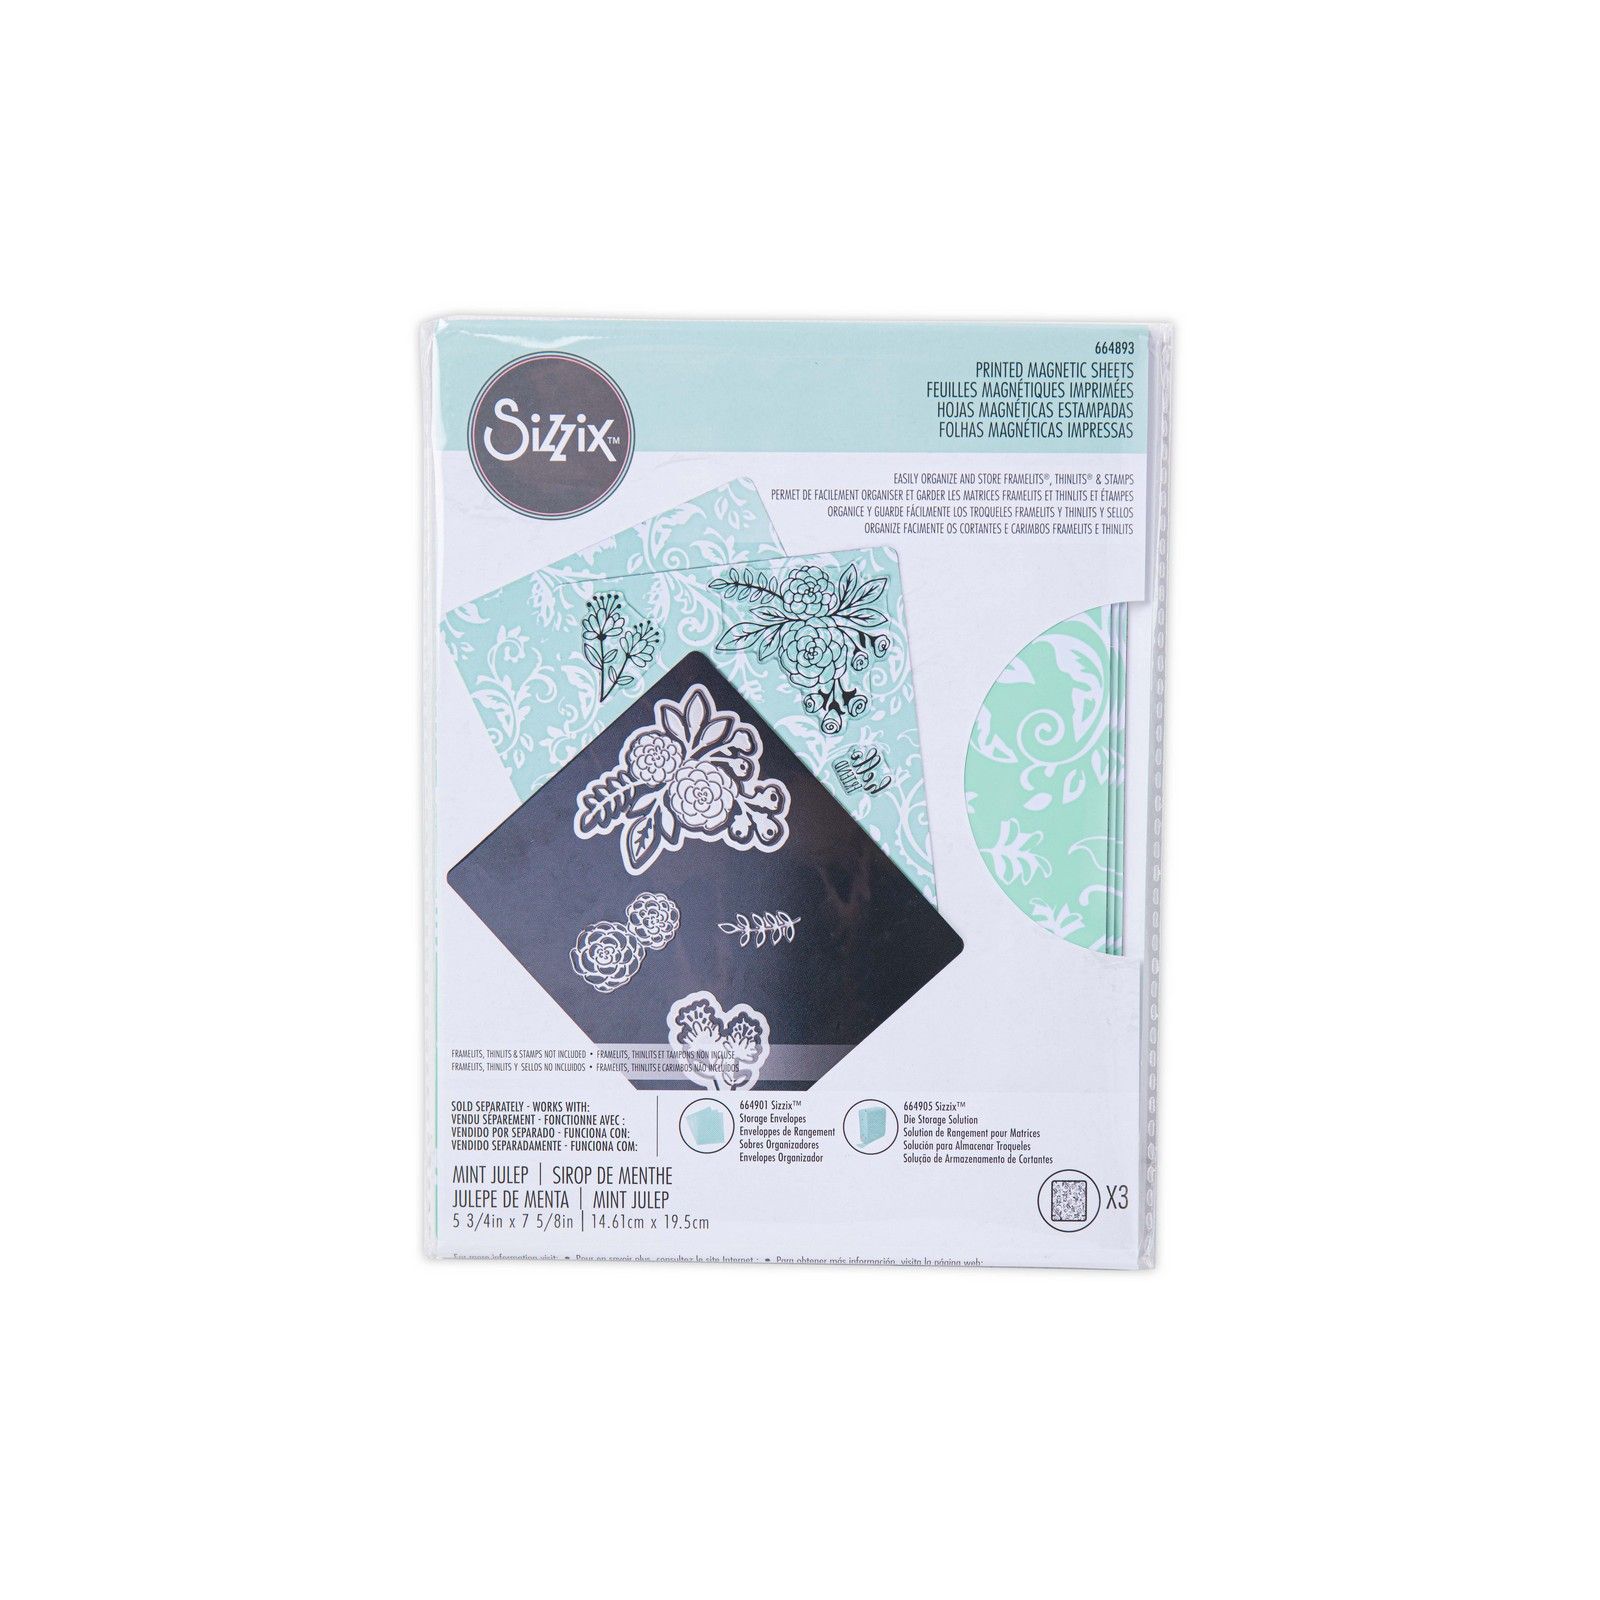 Sizzix • Storage Printed Magnetic Sheets 5 3/4" x 7 5/8" 3 Pack